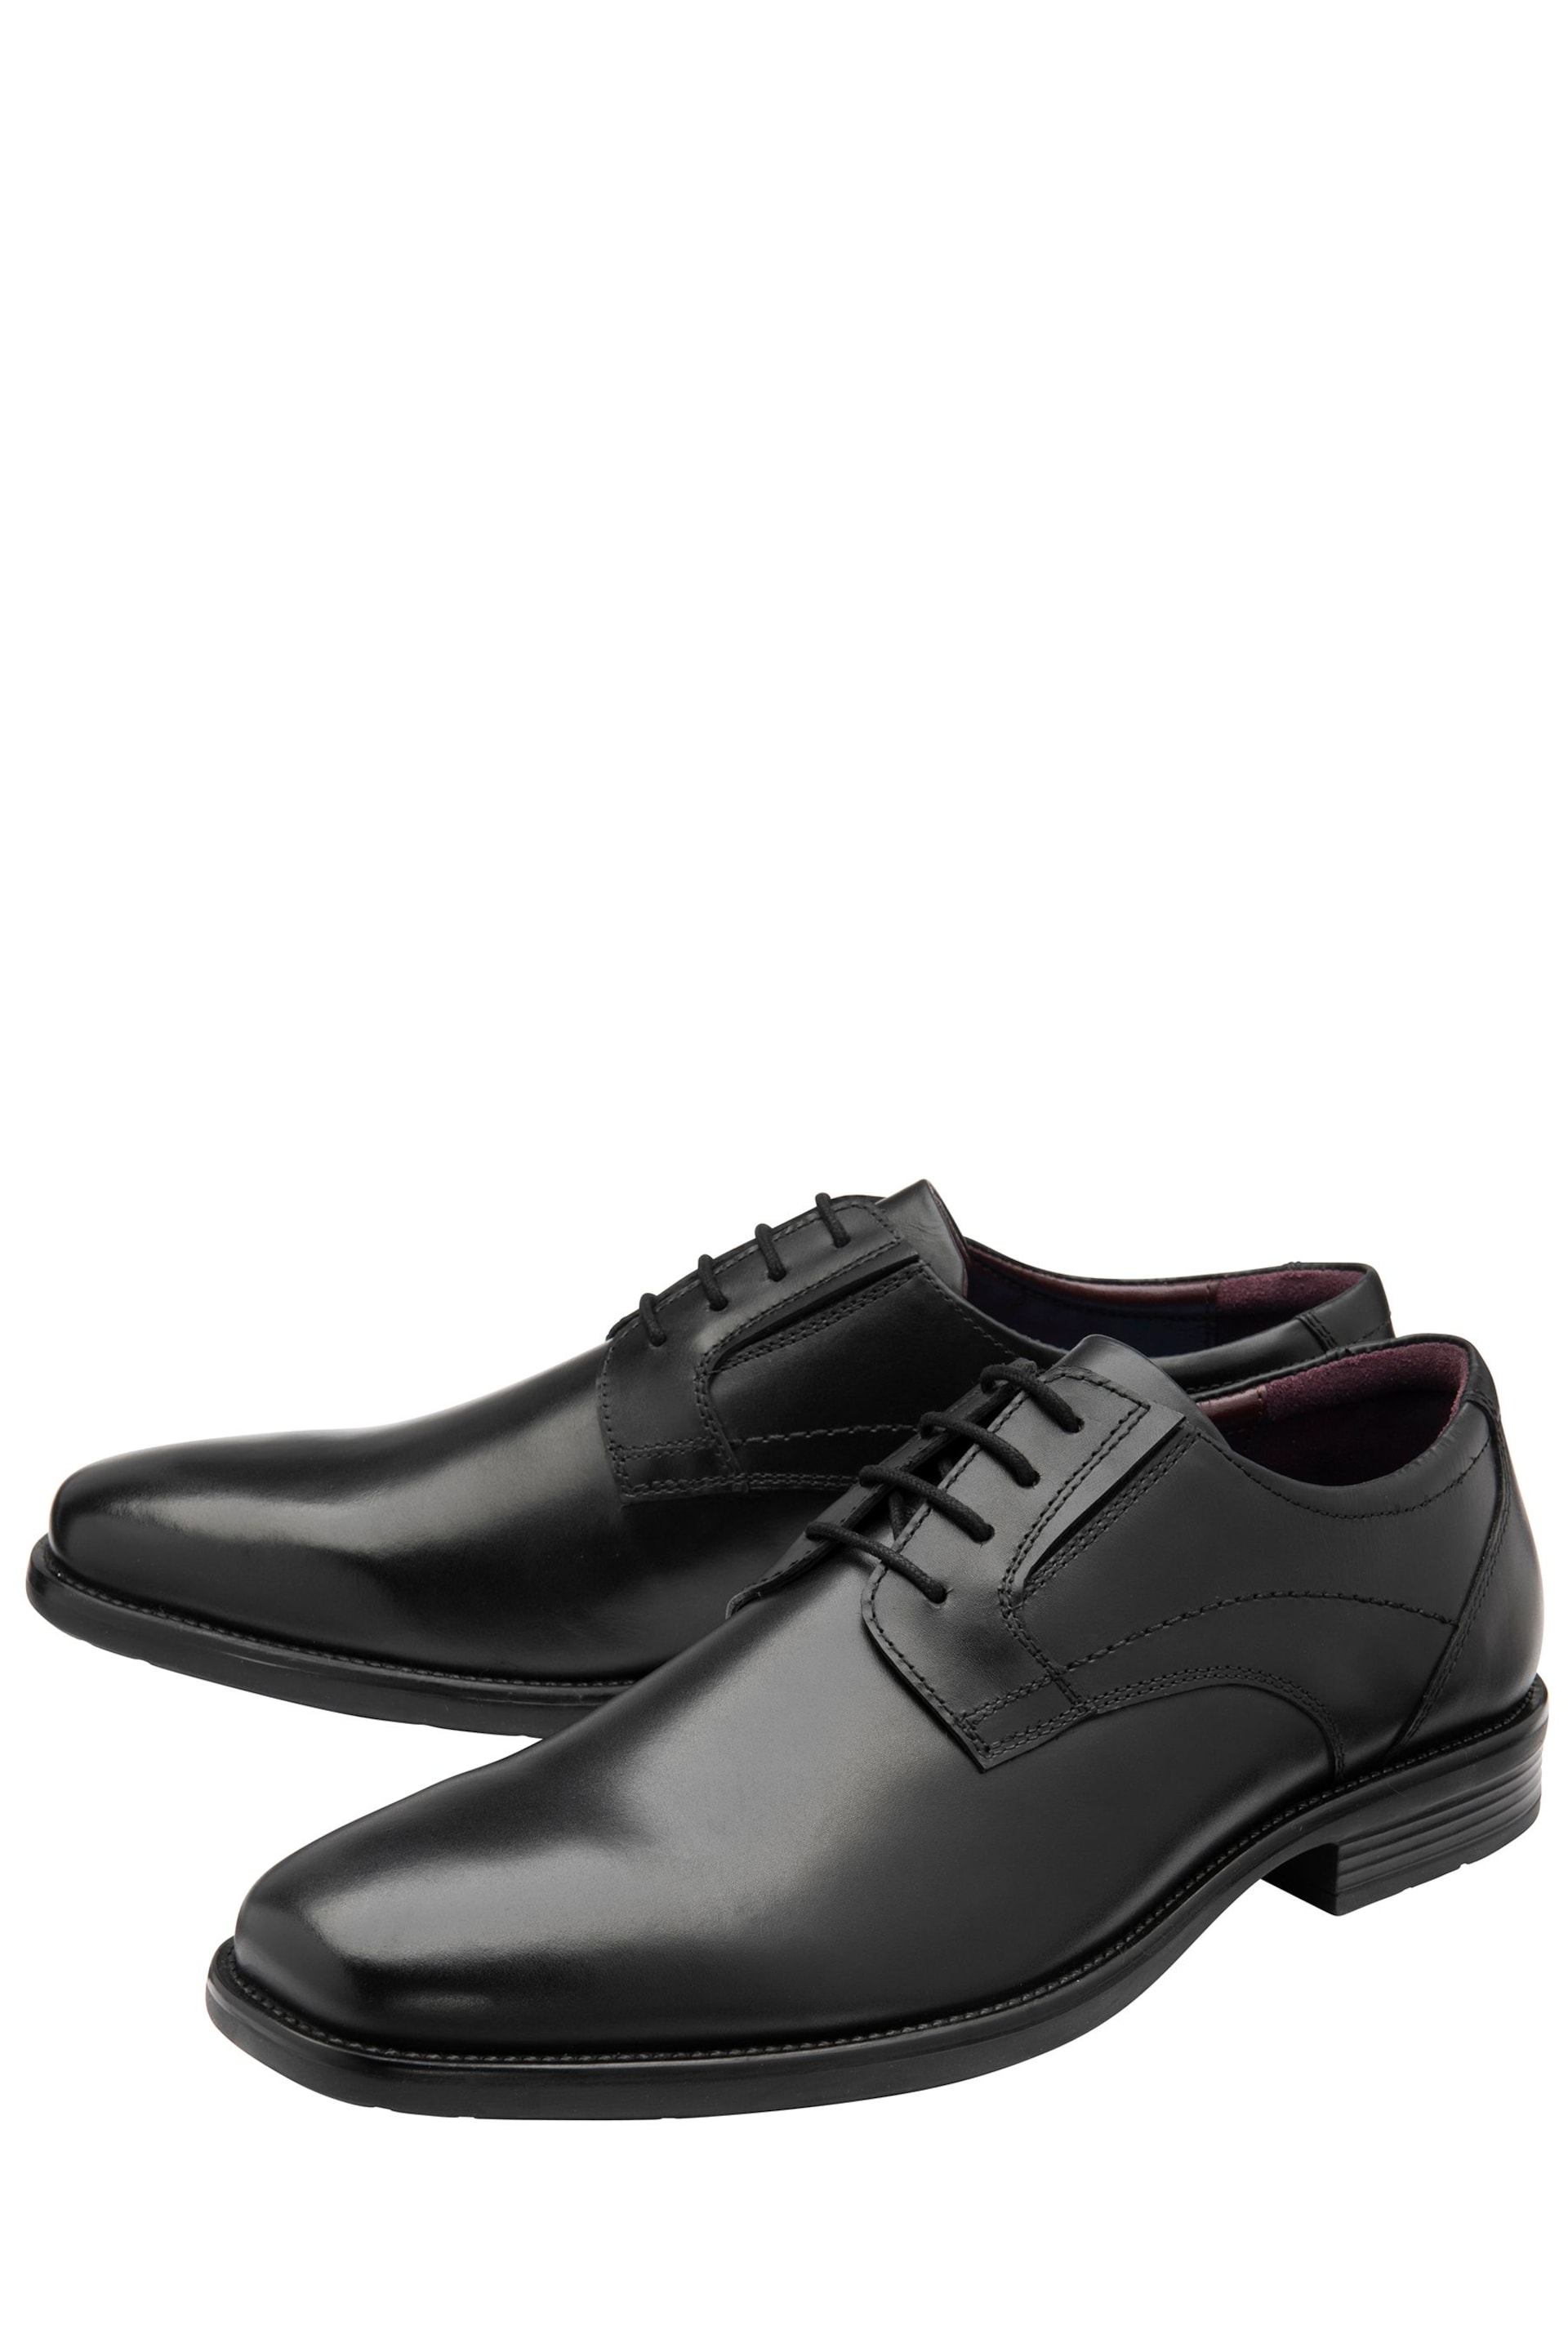 Lotus Black Leather Derby Shoes - Image 2 of 4